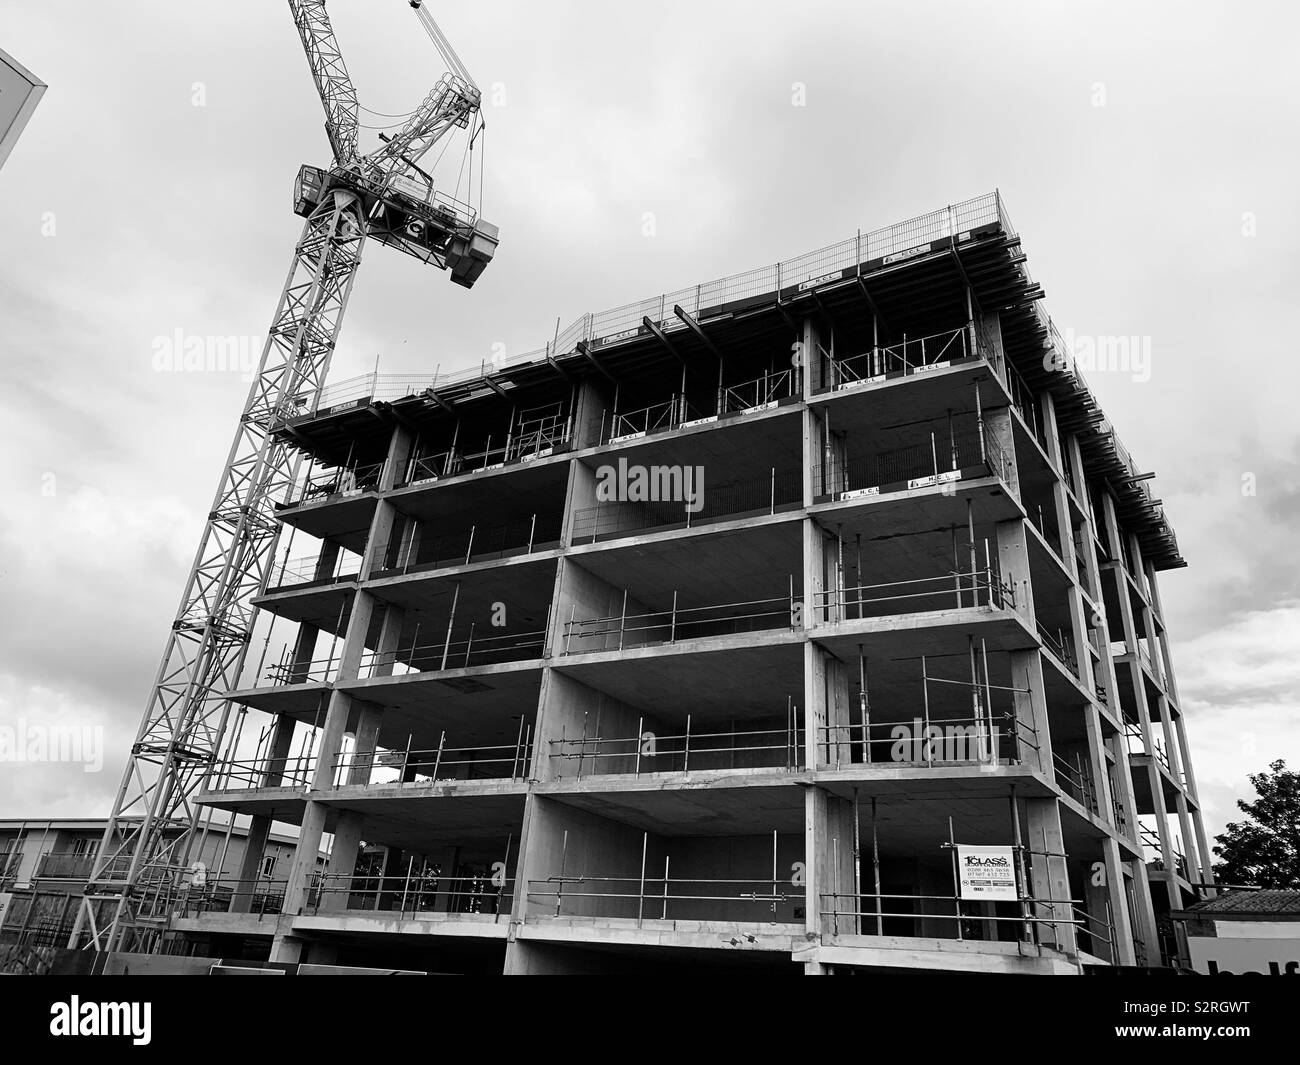 A new building under construction in Ilford, Greater London Stock Photo